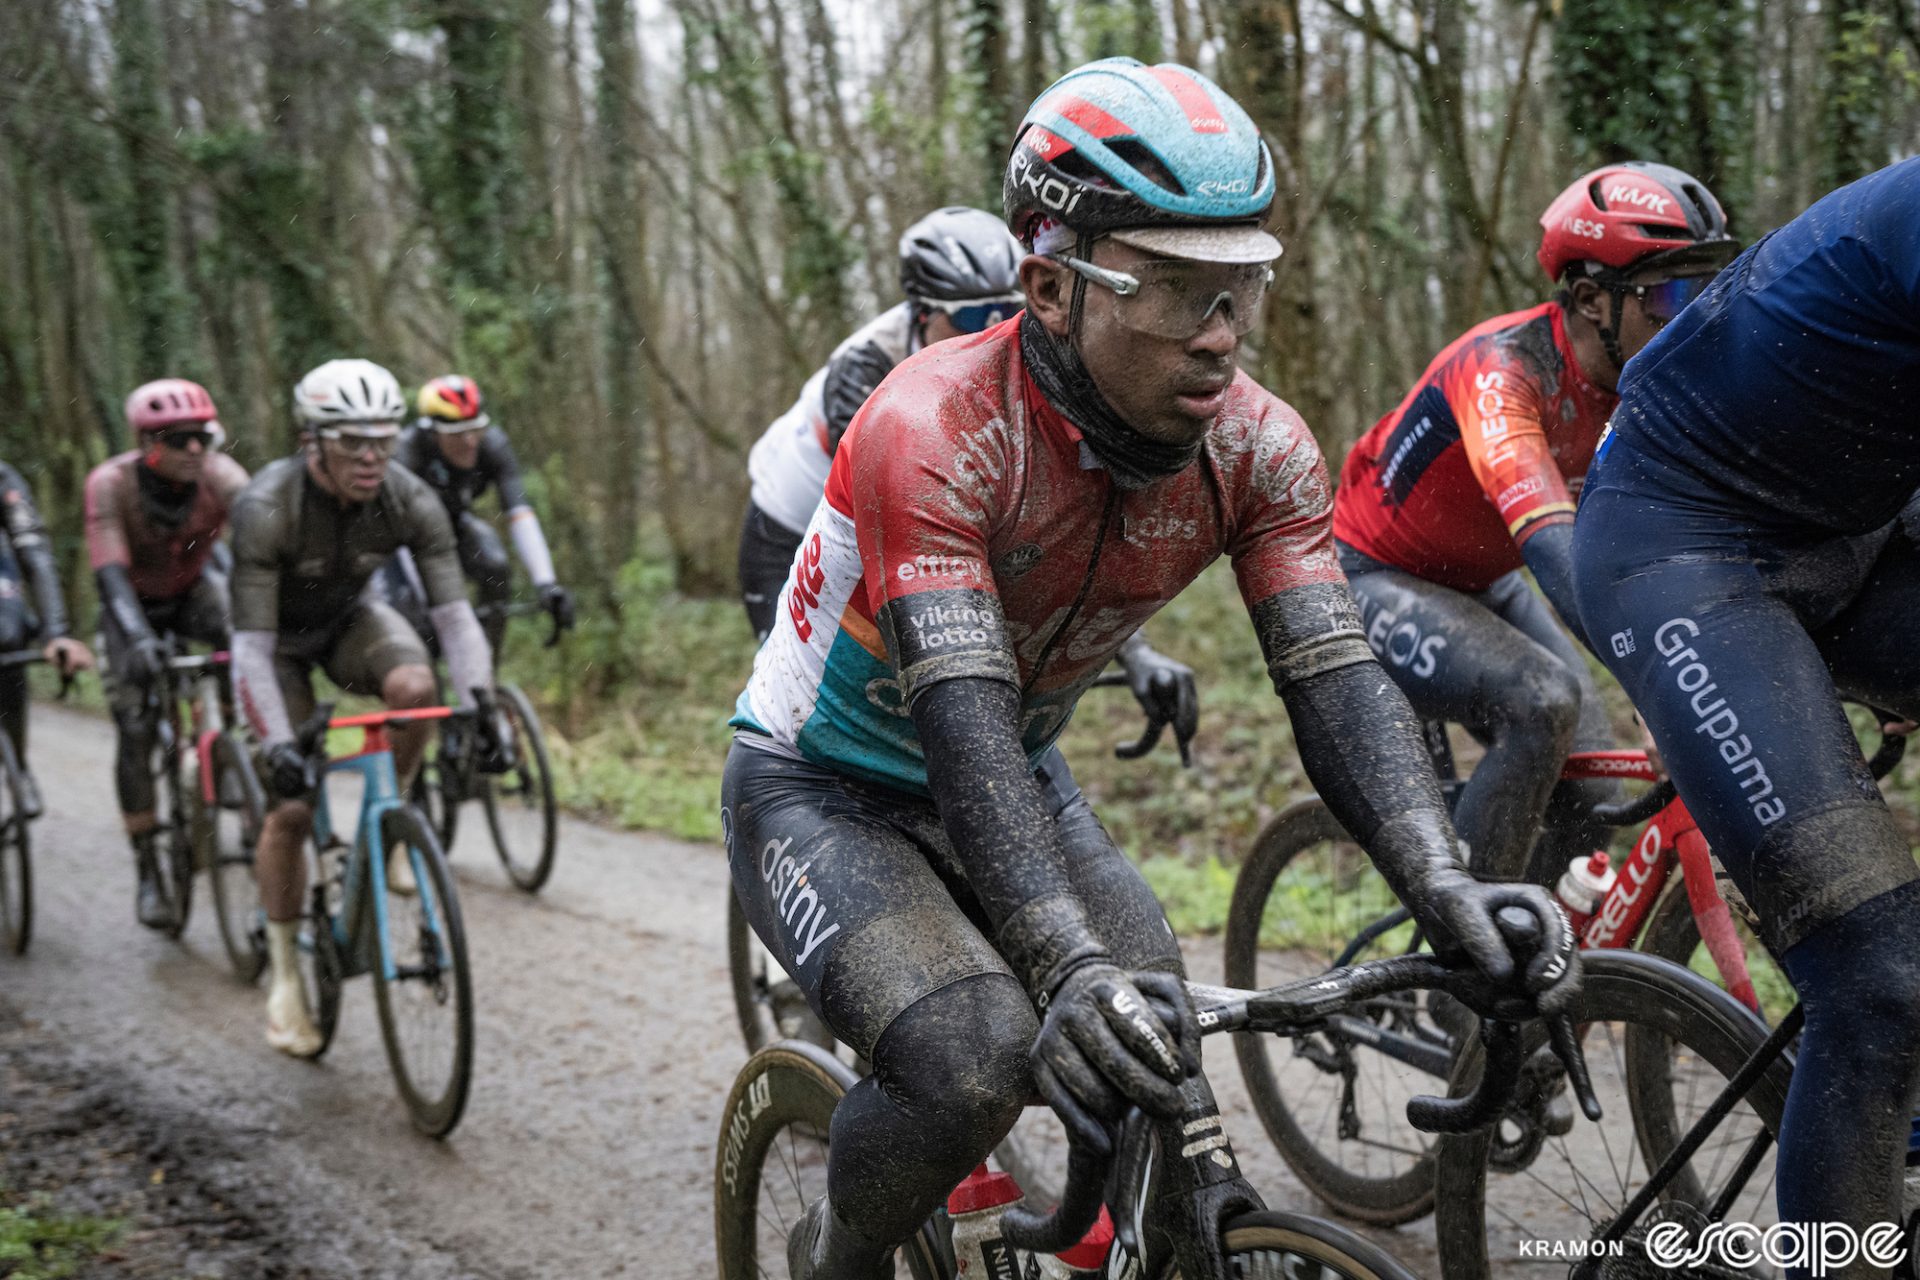 Caleb Ewan rides muddy cobbles in the 2023 Gent-Wevelgem. He looks absolutely miserable, sopping wet and covered in grime, and has a faraway look on his face.